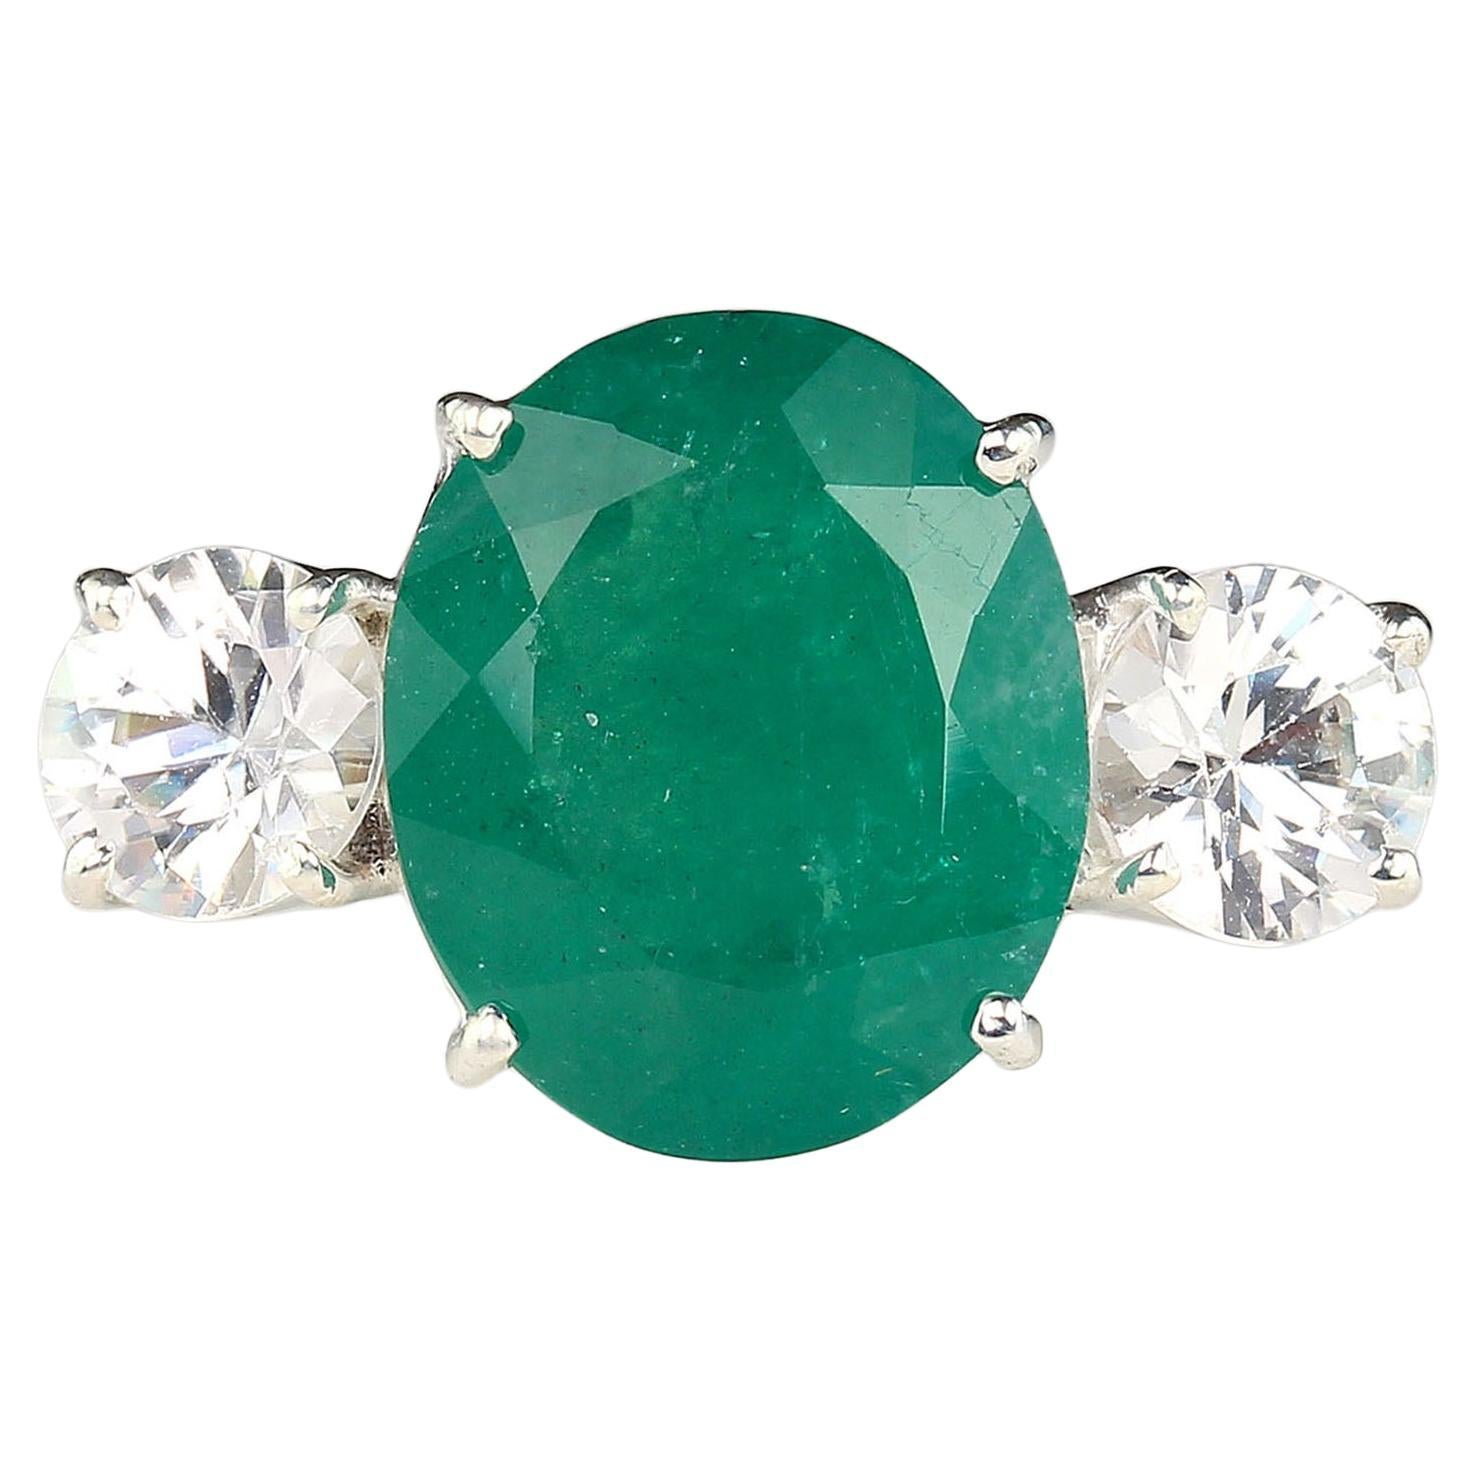 Magnificent dinner ring of huge 6.46 carat oval Brazilian Emerald accented with two round genuine Zircons, 2.58 carats total weigh set in Sterling Silver. This Emerald came straight from one of our favorite suppliers in Belo Horizonite, Minas